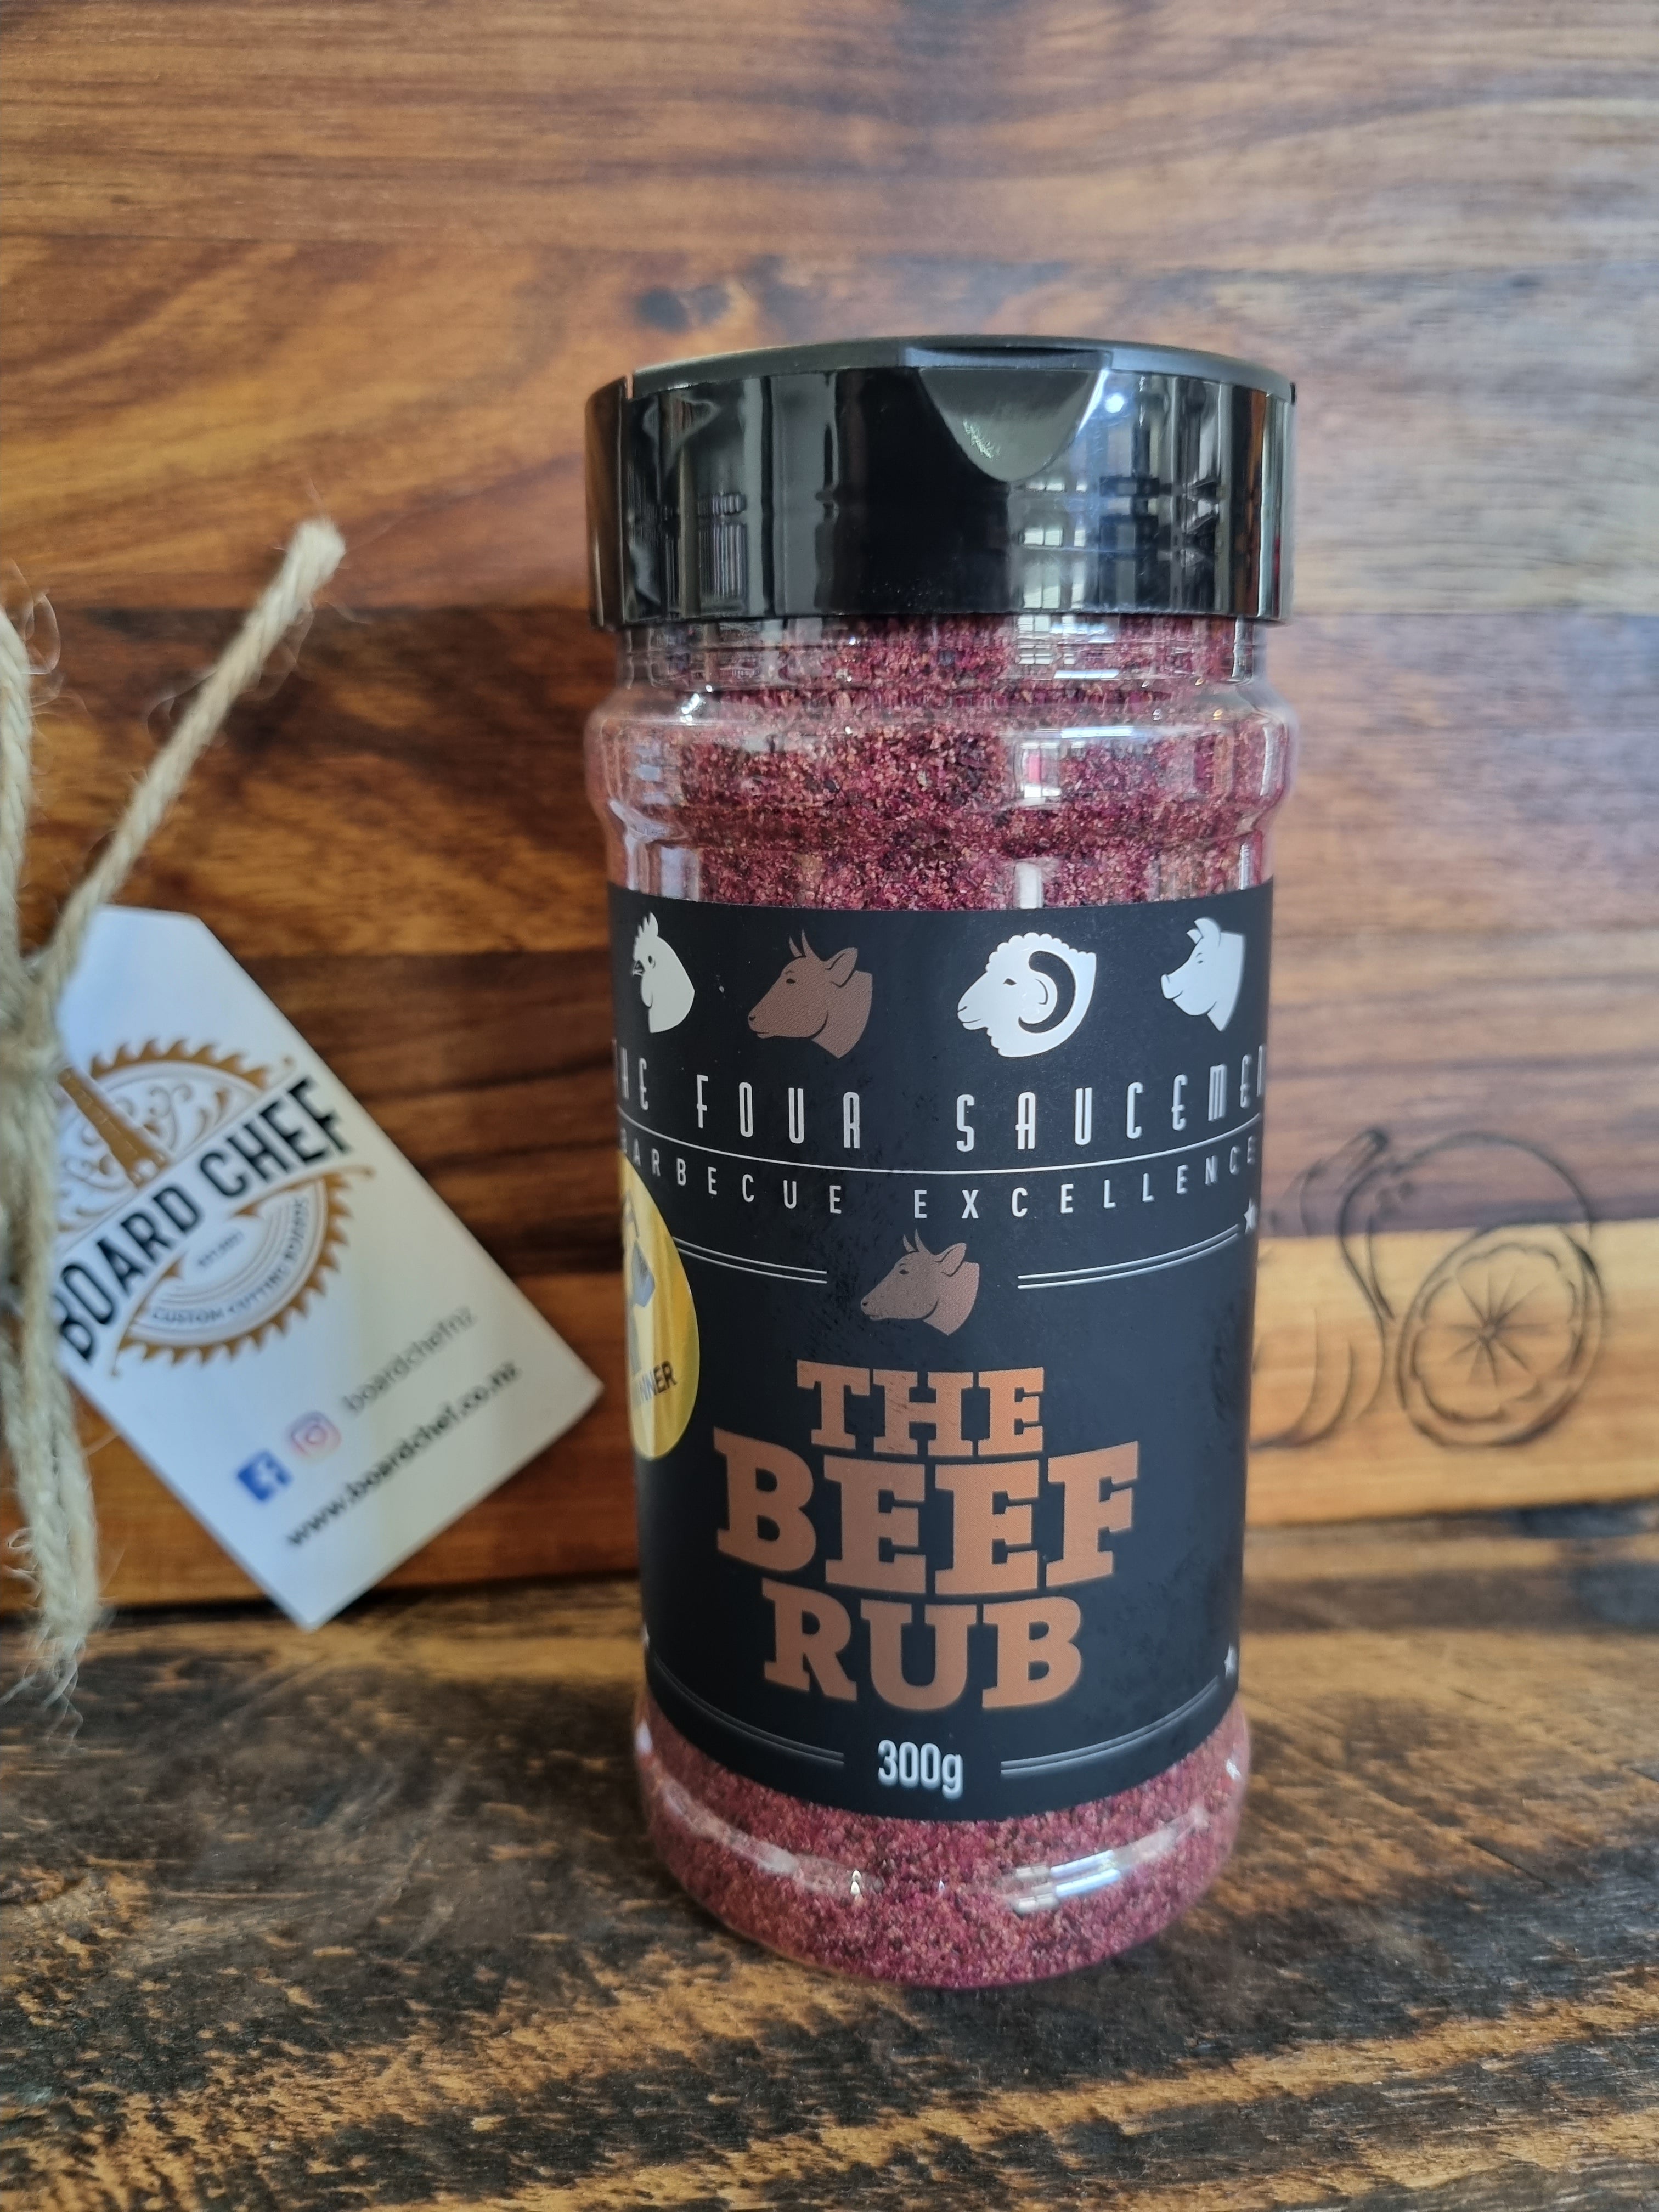 The Beef Rub by The Four Saucemen